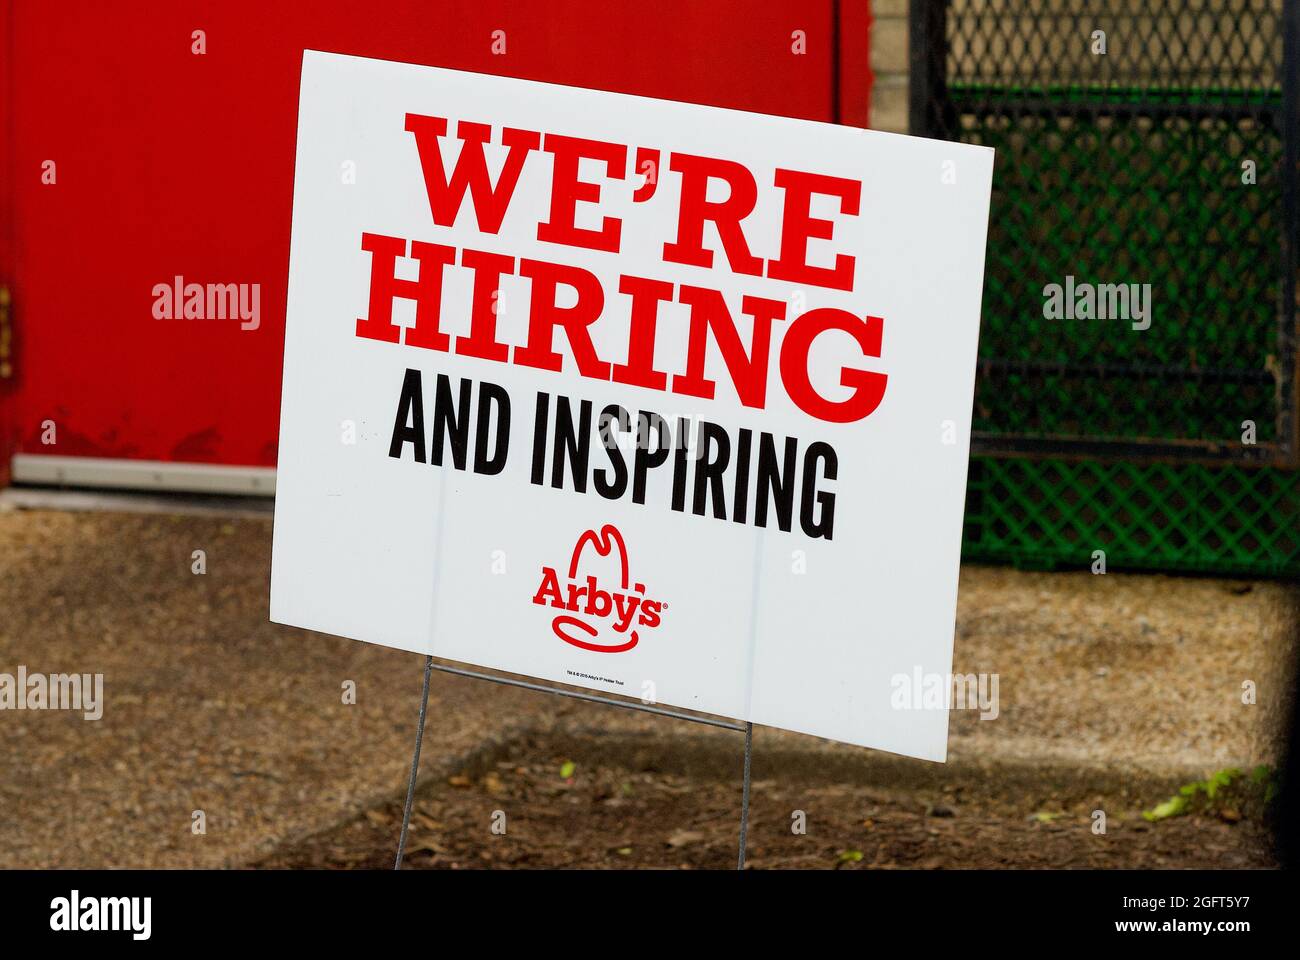 Chantilly, Virginia, USA - May 27, 2021: Close-up image of a sign posted outside an Arby's Restaurant drive-through advertising 'We're Hiring'. Stock Photo